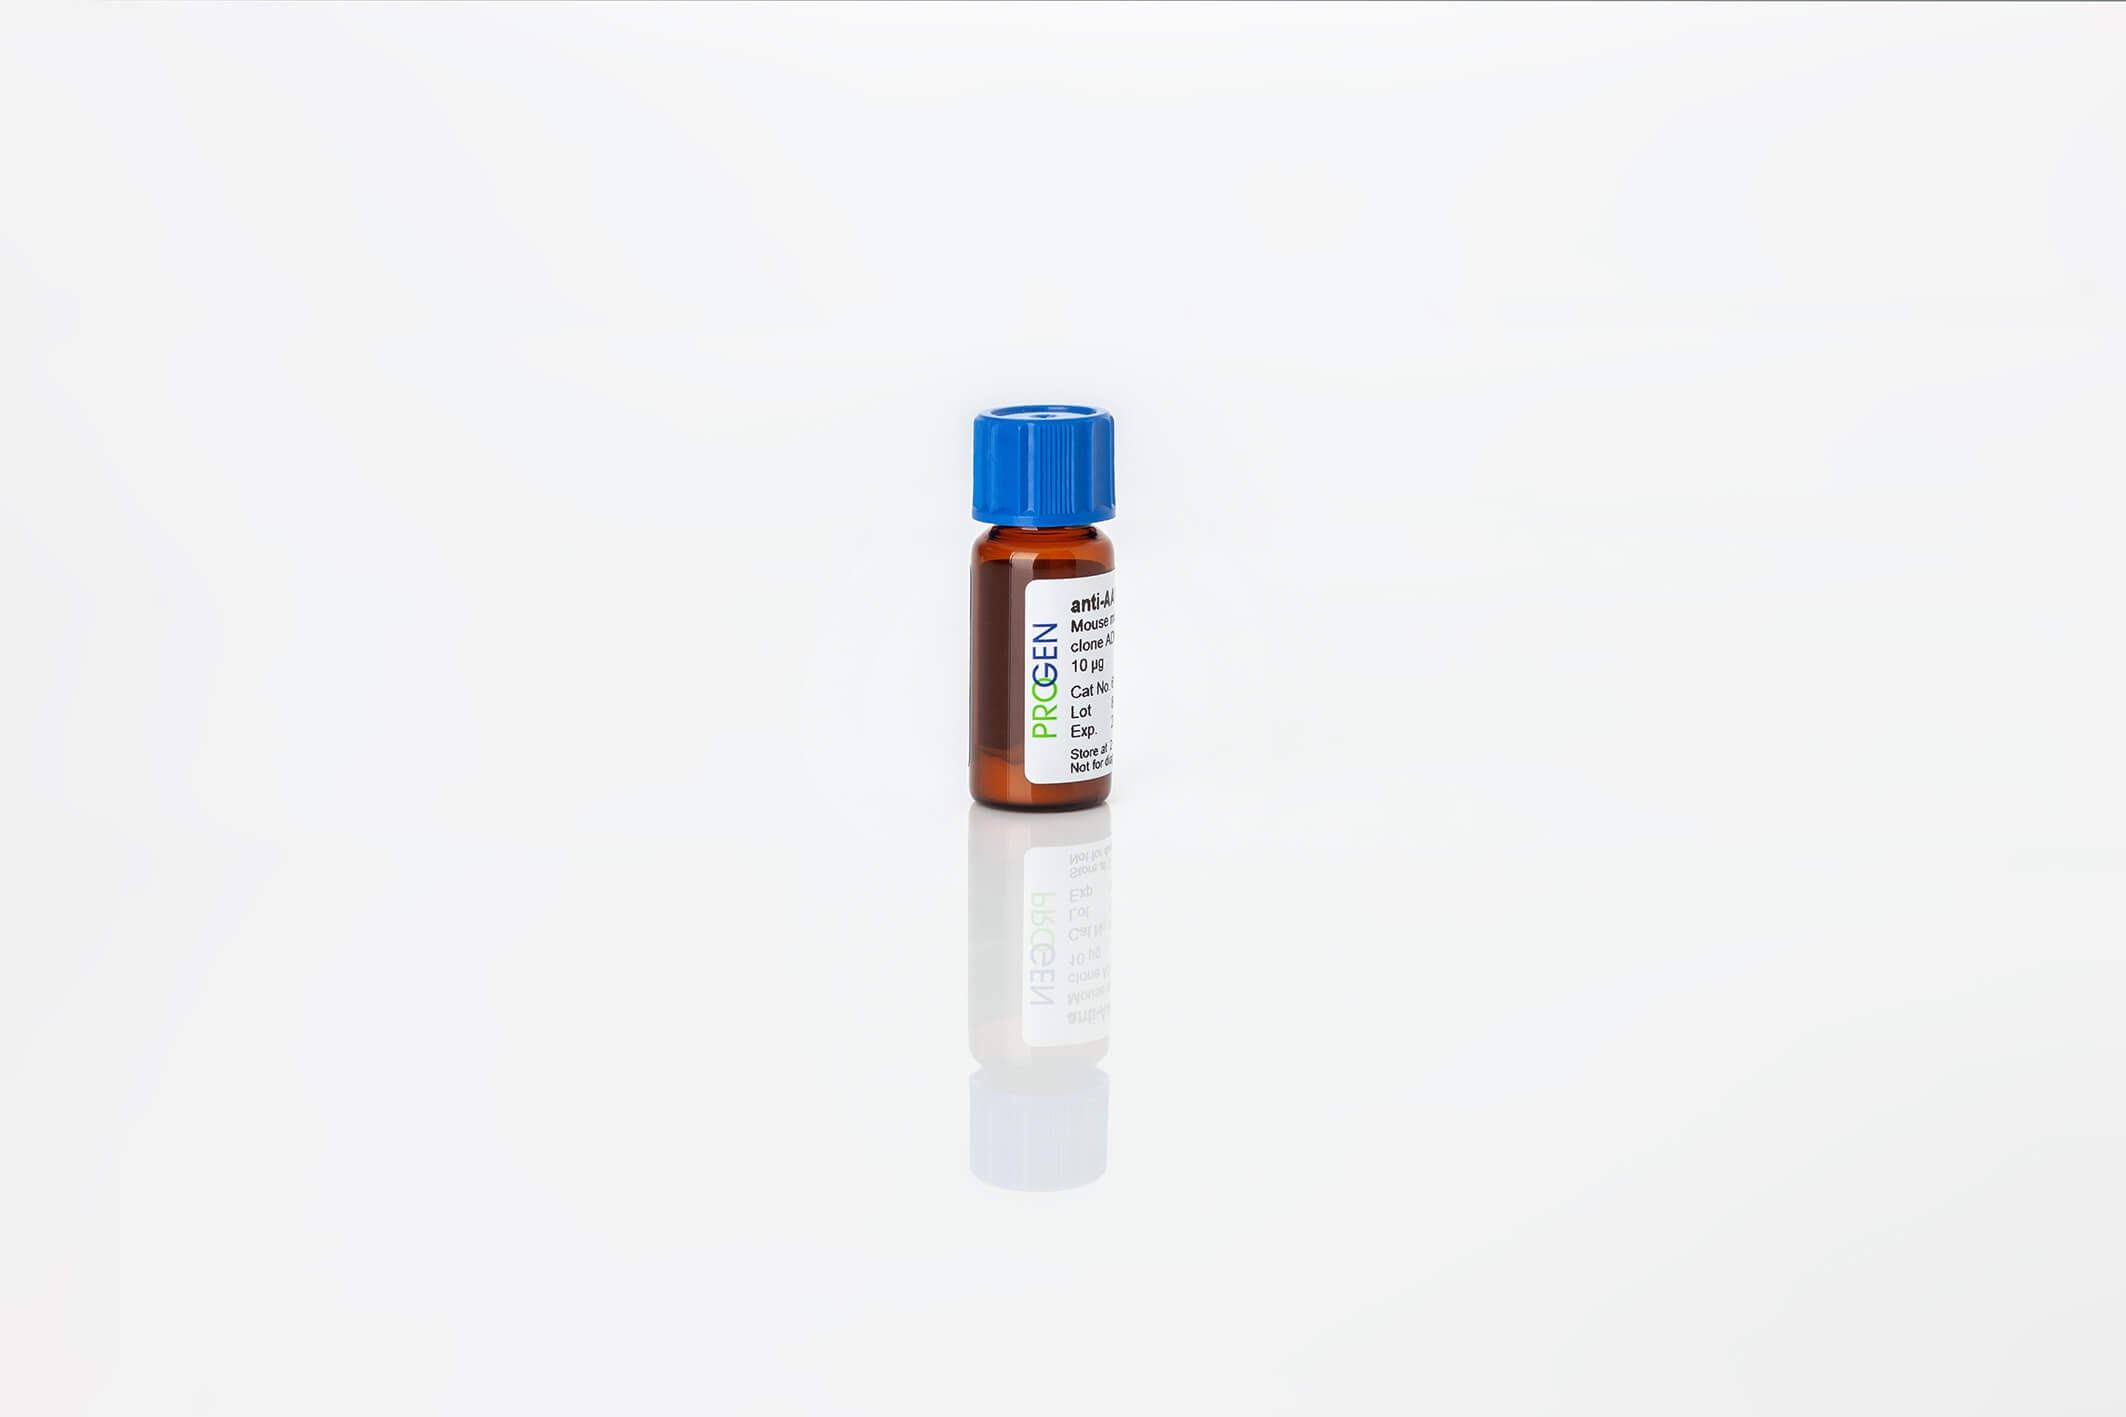 anti-Complement C3a alpha mouse monoclonal, H13, lyophilized, purified